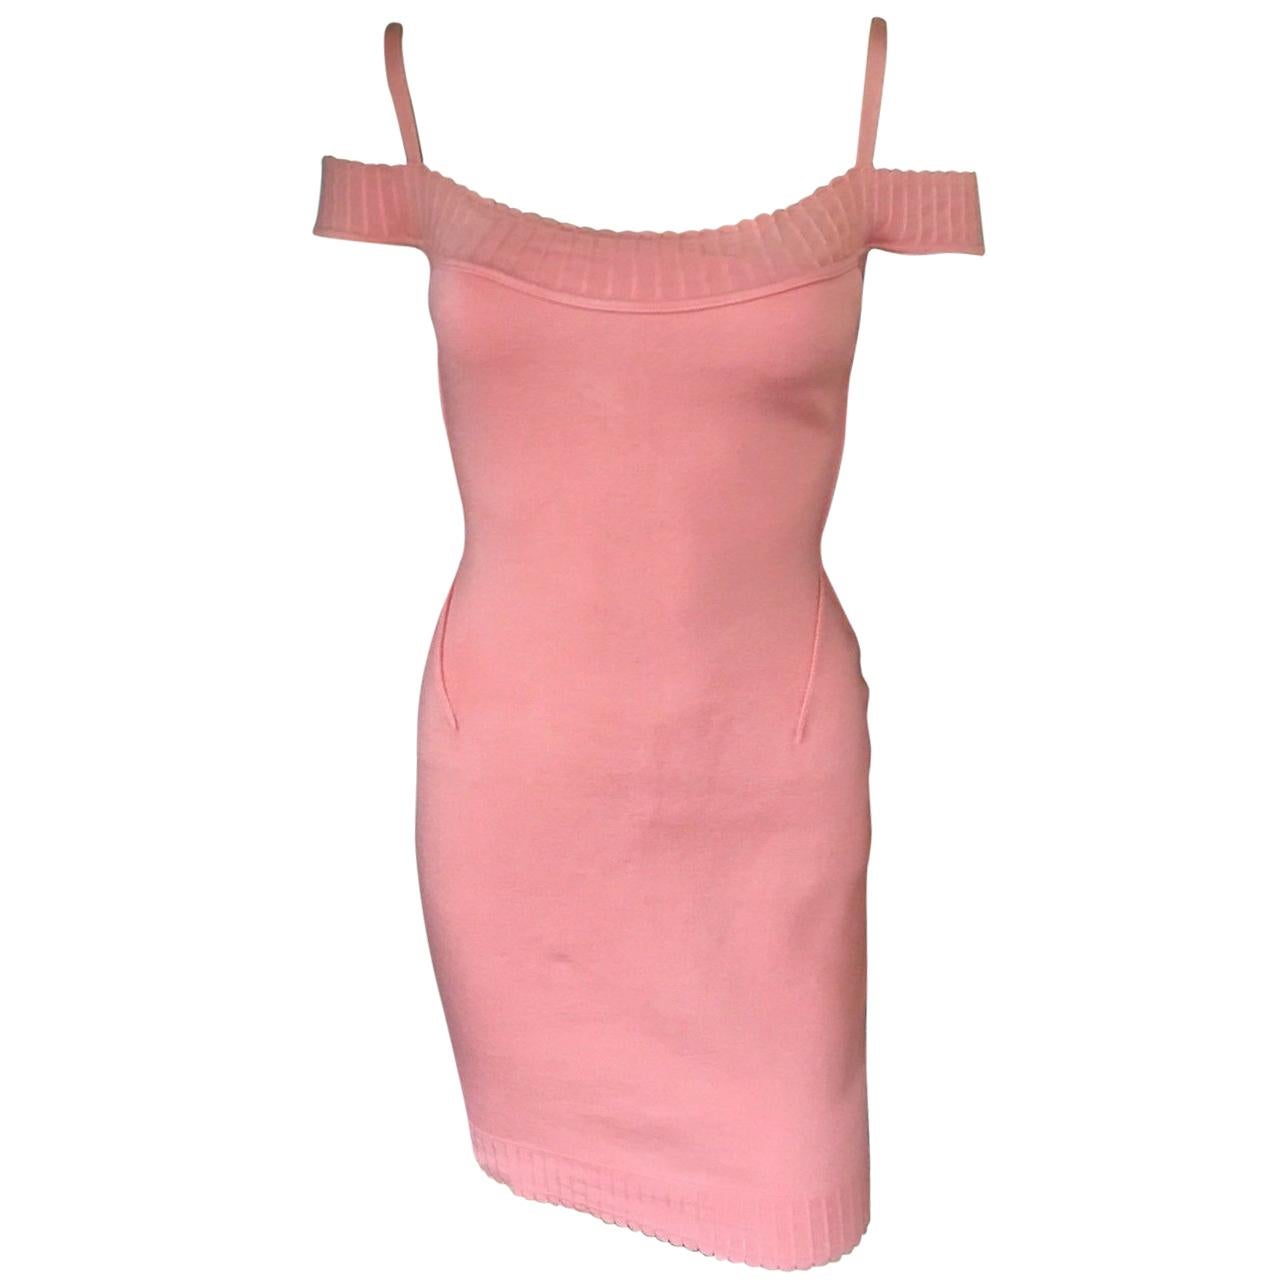 Azzedine Alaia S/S 1992 Vintage Off Shoulder Peach Fitted Dress